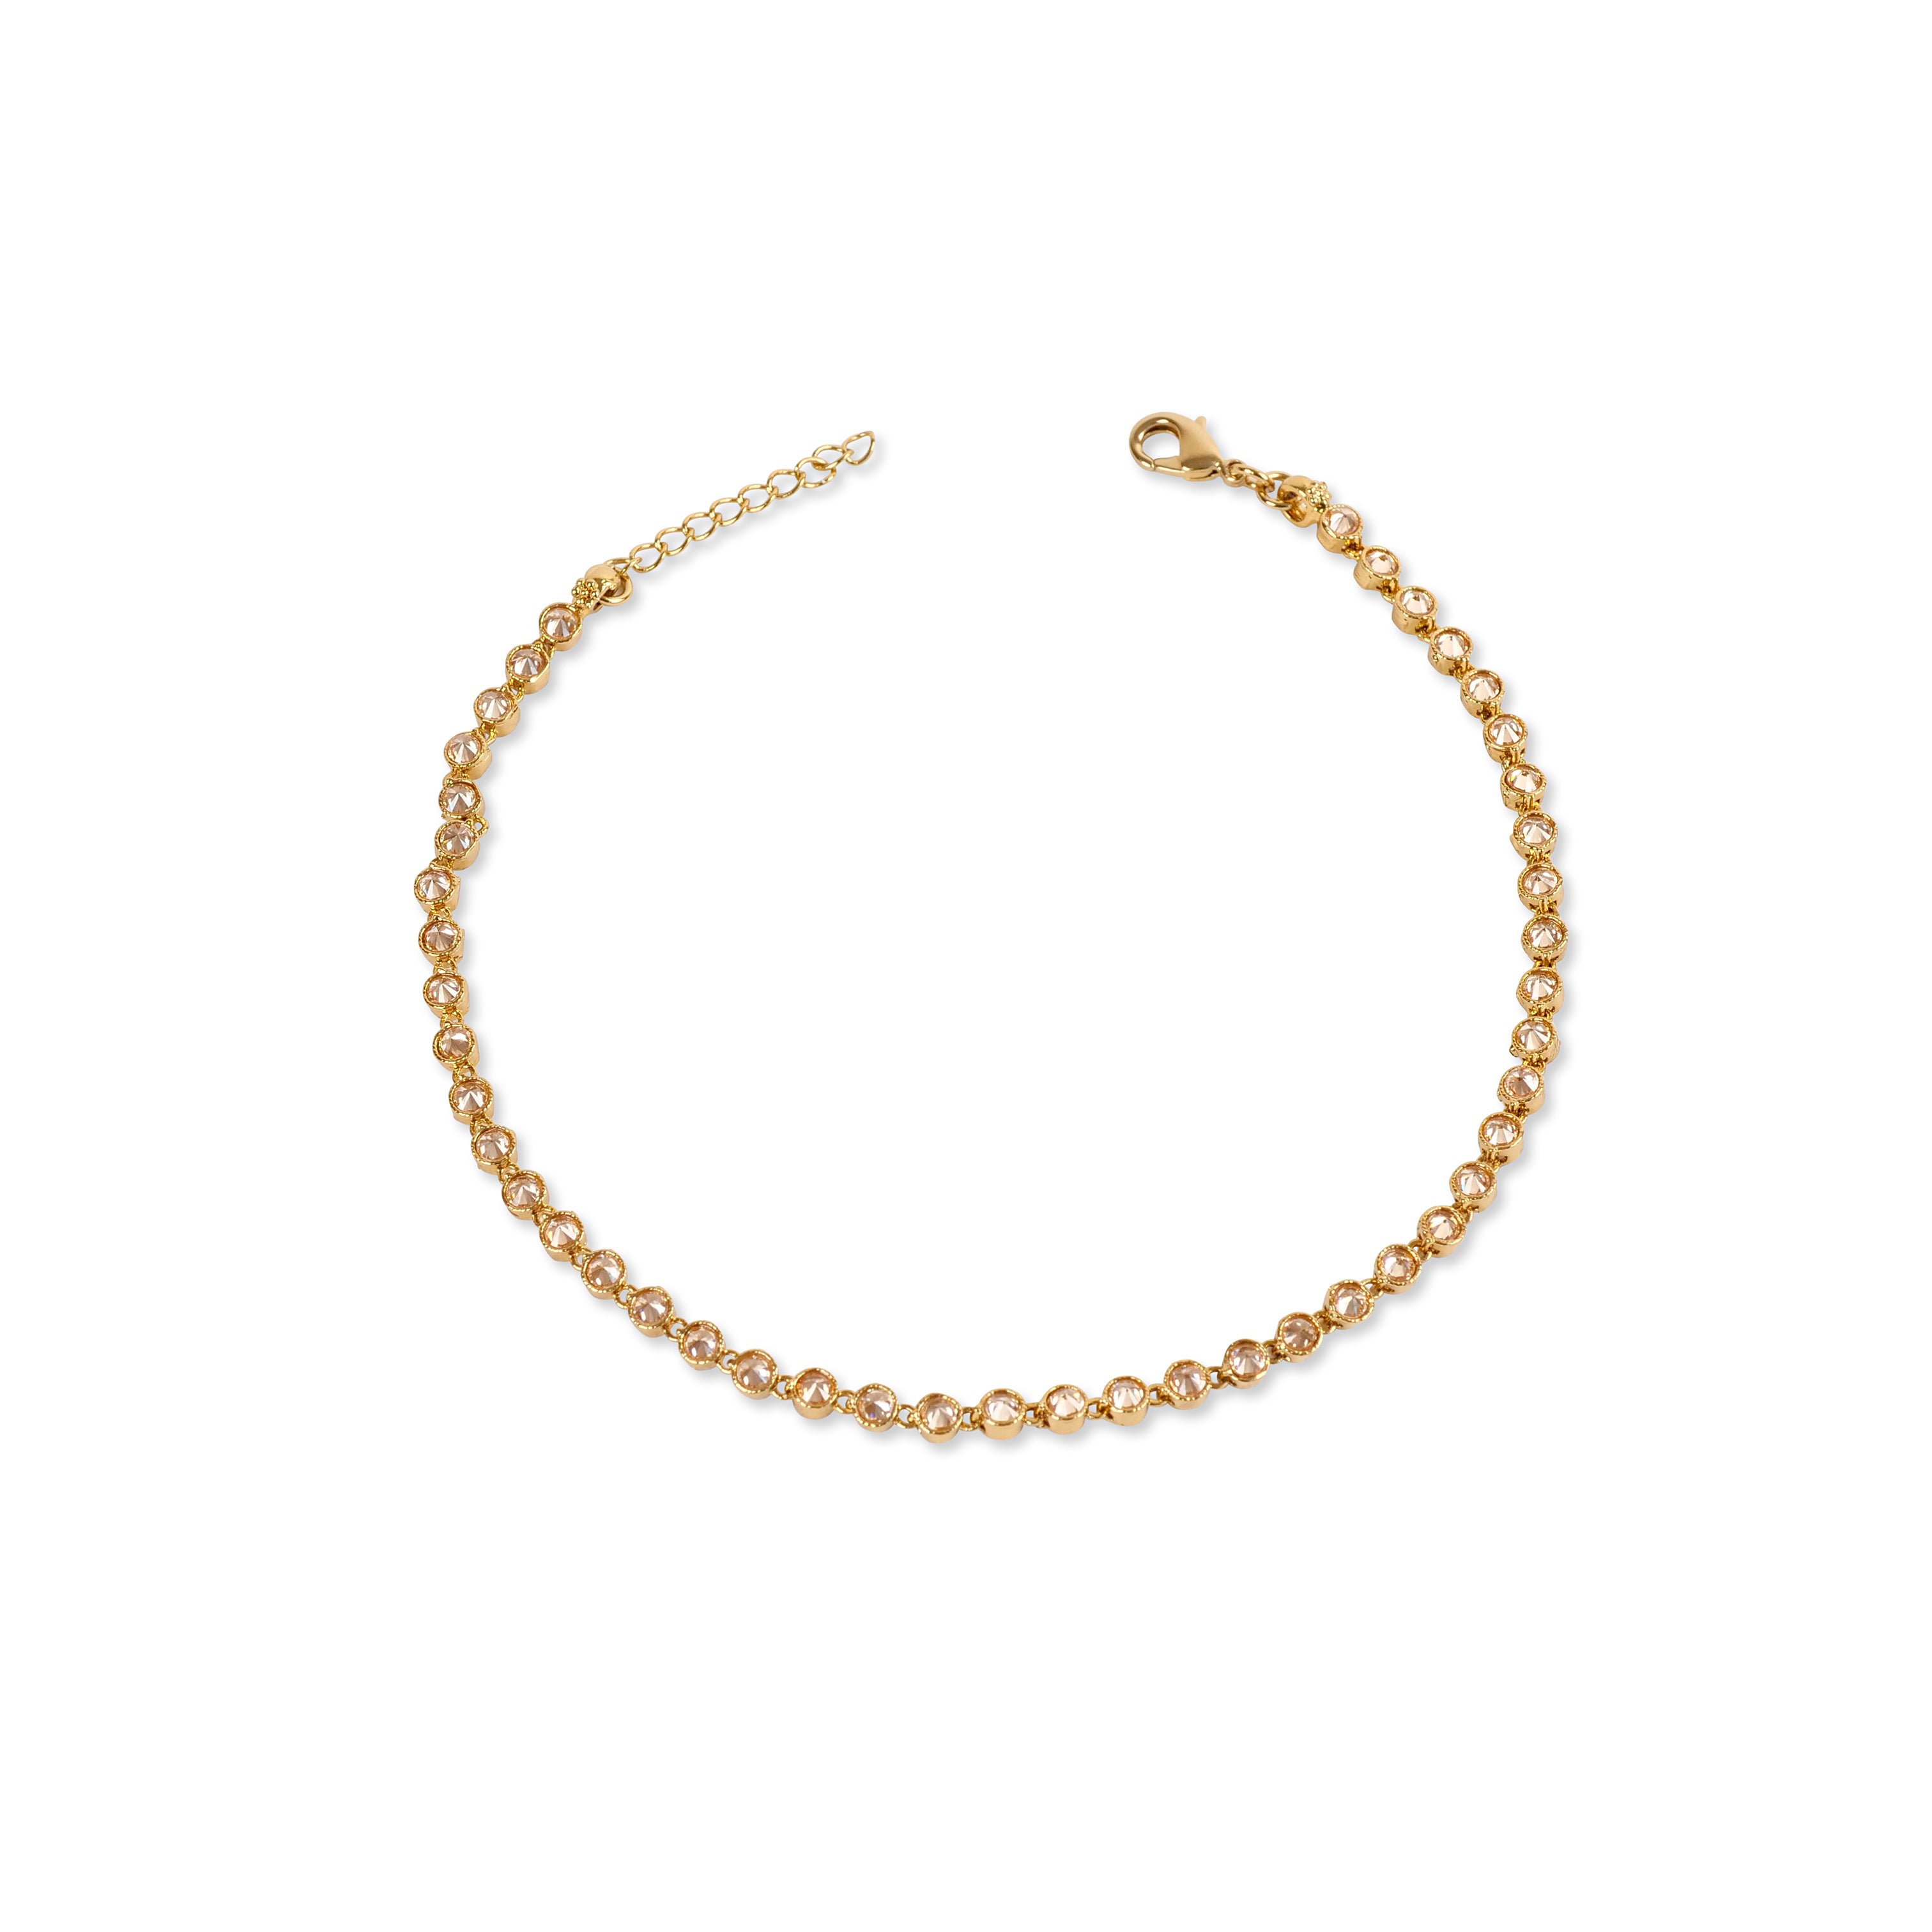 Round Classic Crystal Anklet in Antique Gold